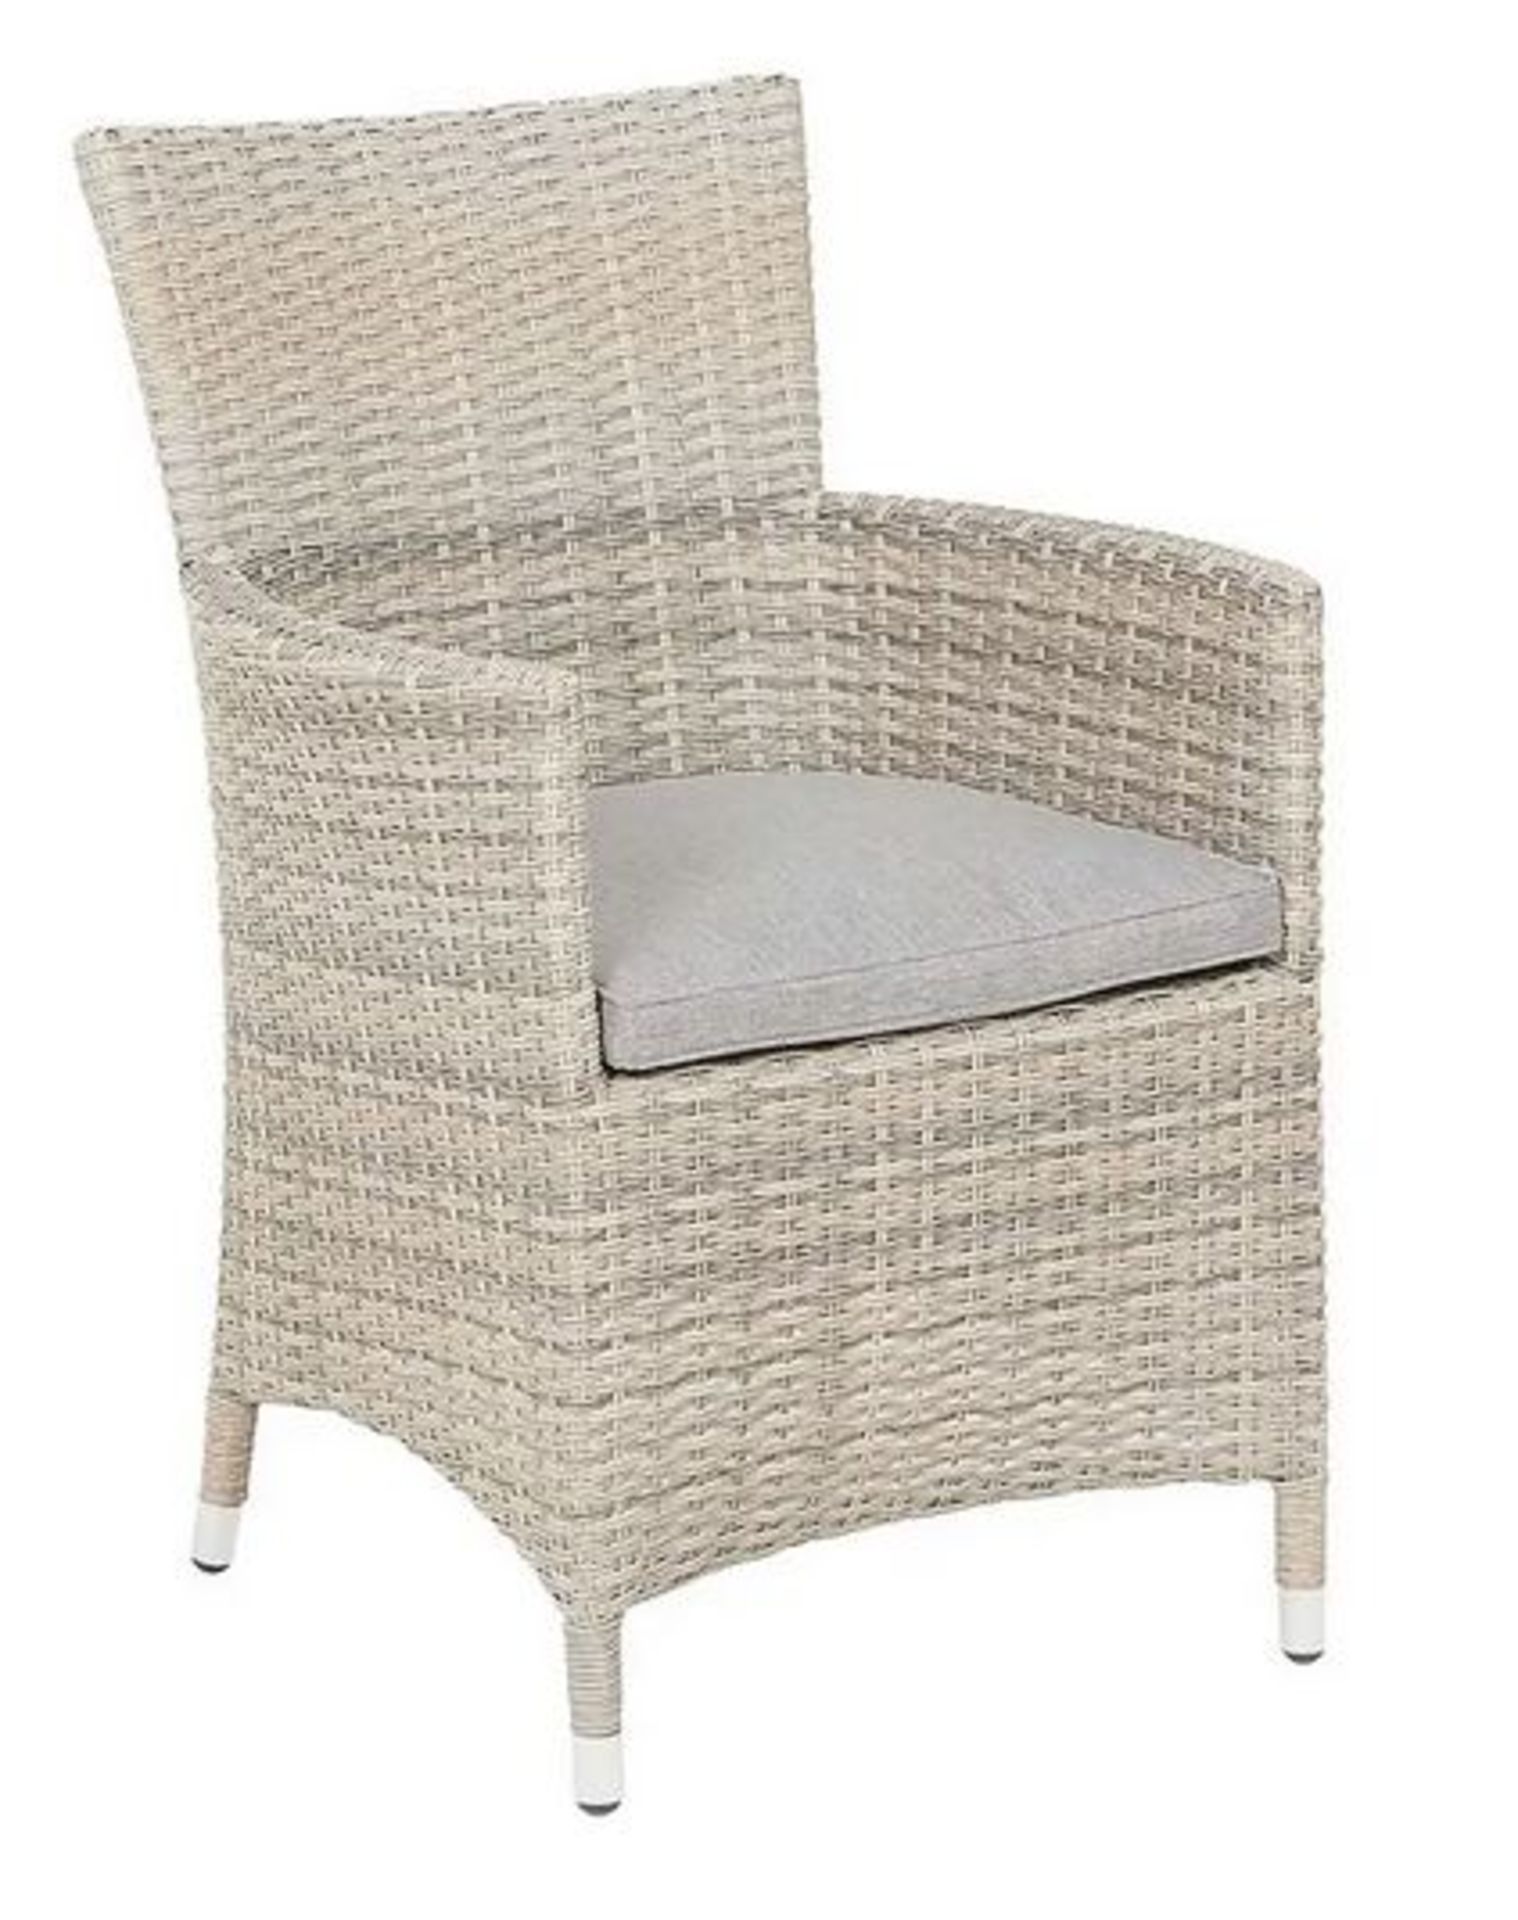 (15) 2x Hartington Florence Collection Rattan Dining Chair With 2x Cushions. (1x In Original Packag - Image 2 of 4